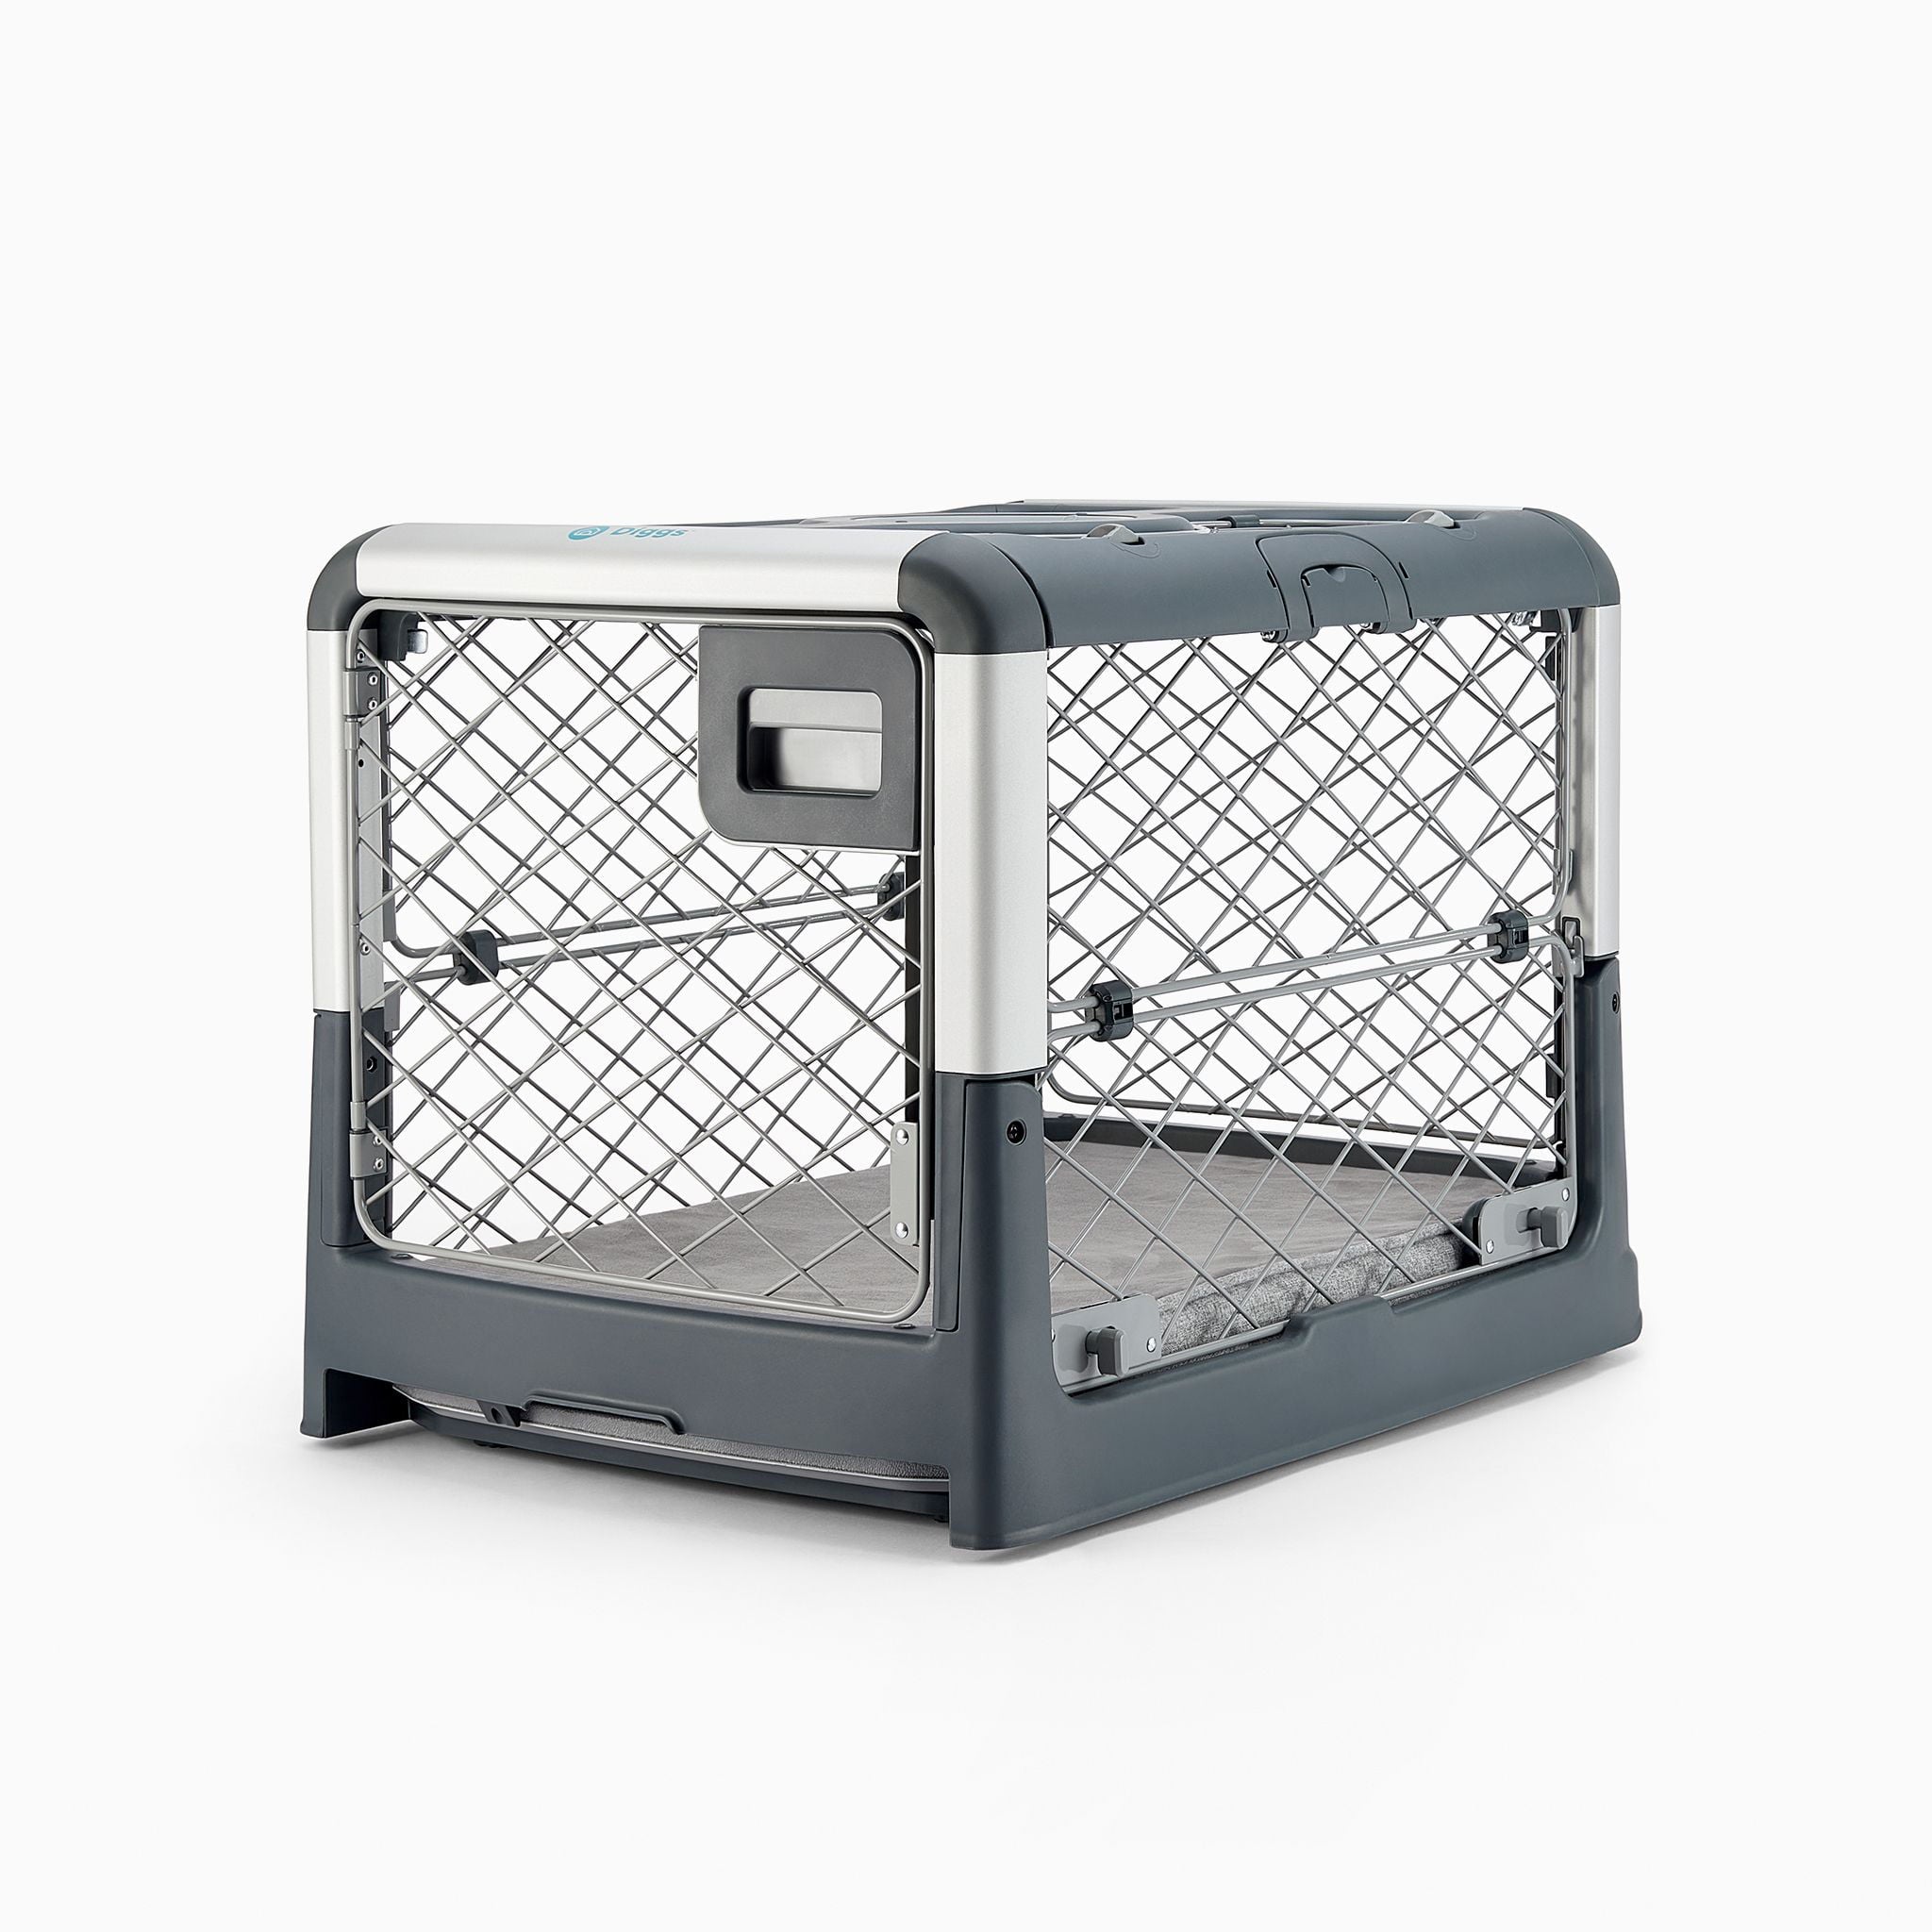 Diggs Revol Small Dog Crate - Portable Travel Dog Crate with Collapsible Kennel Walls